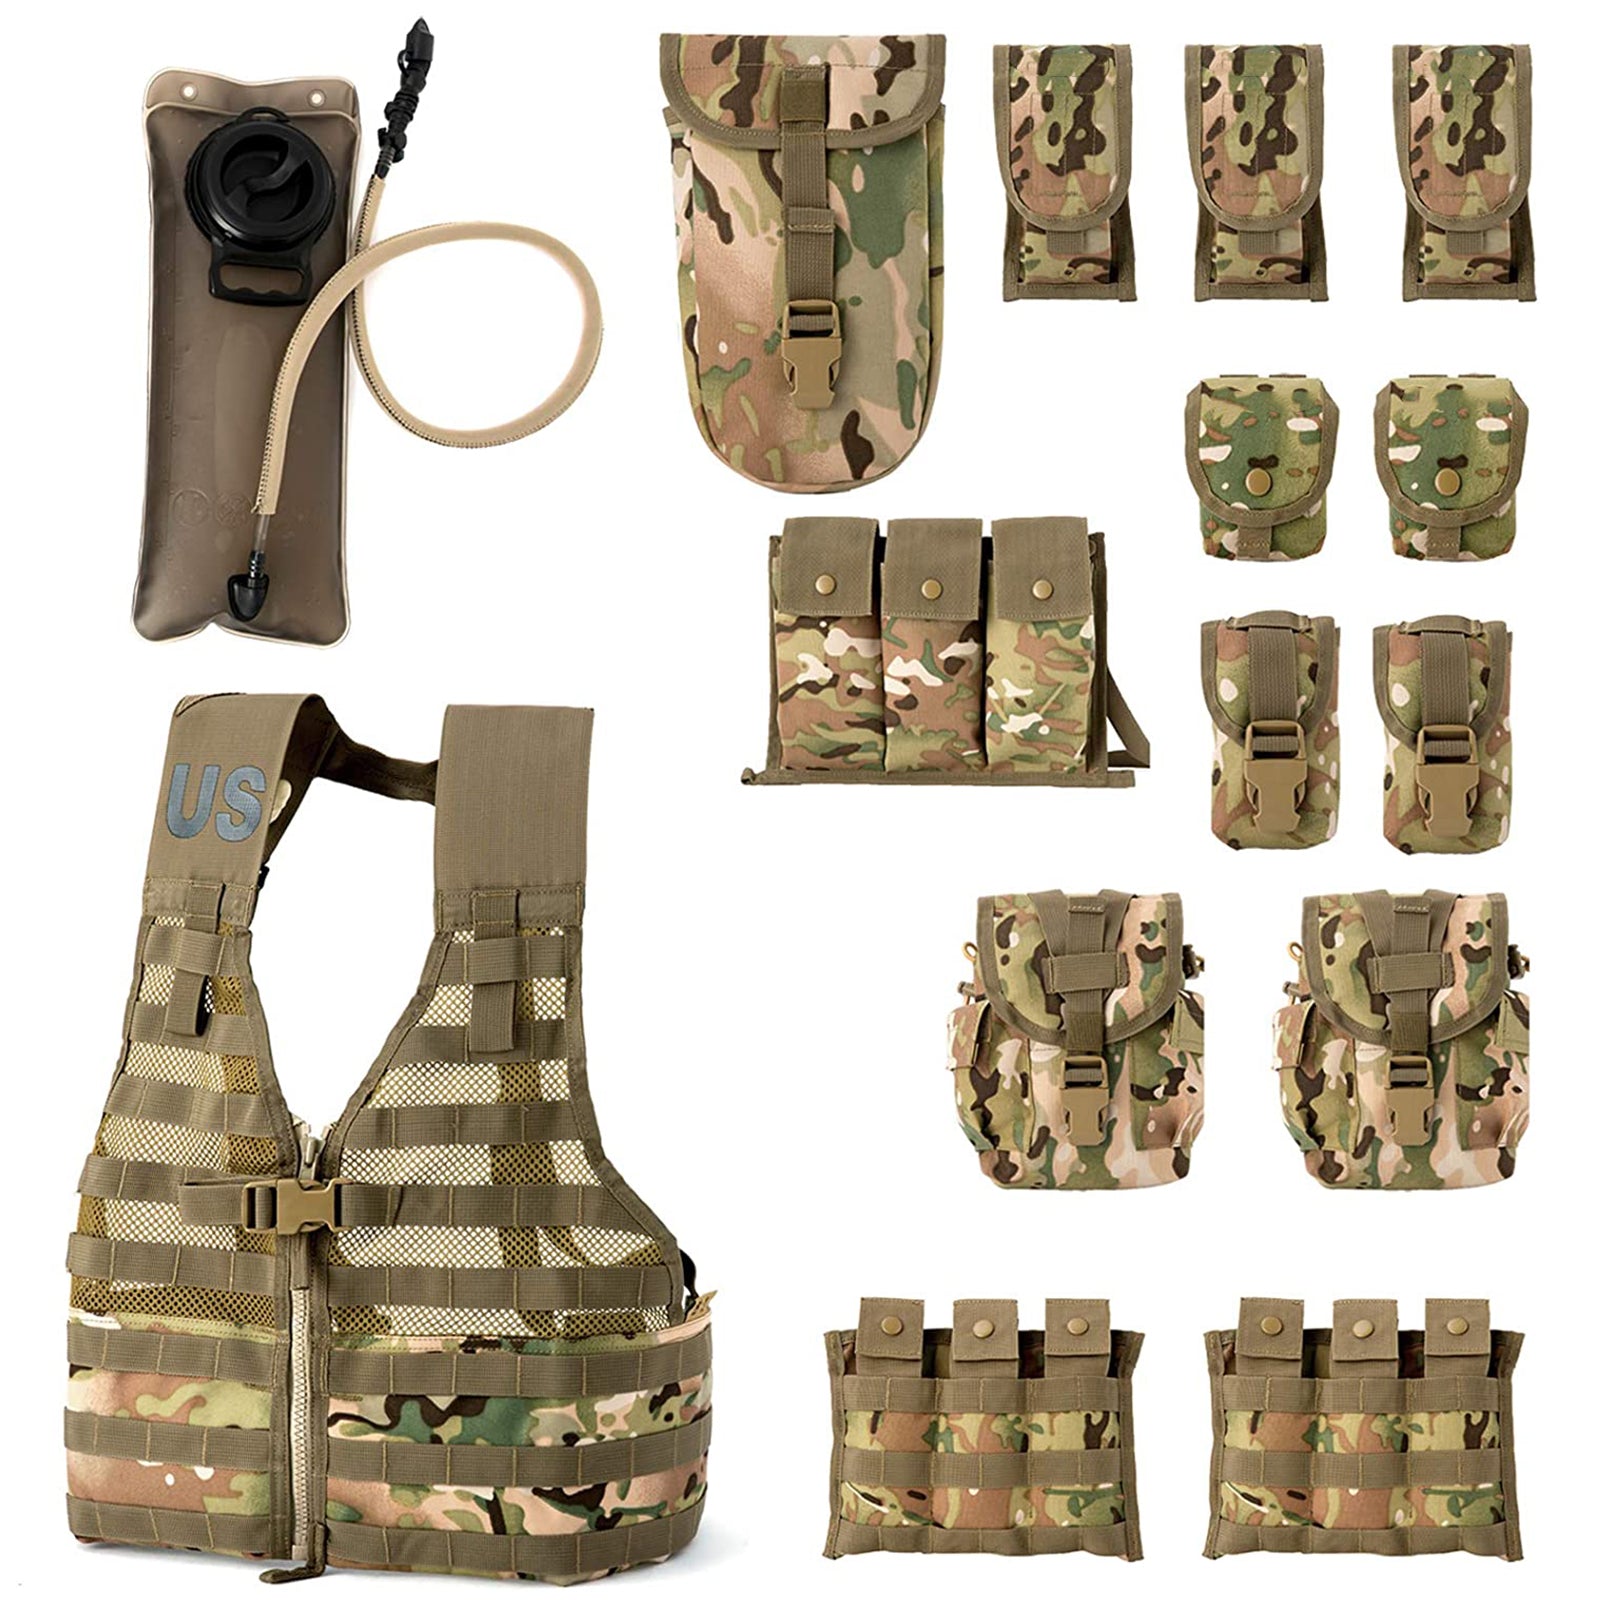 Akmax Military Rifleman Fighting Load Carrier Vest and Army Pouches Multicam - AKmax Military